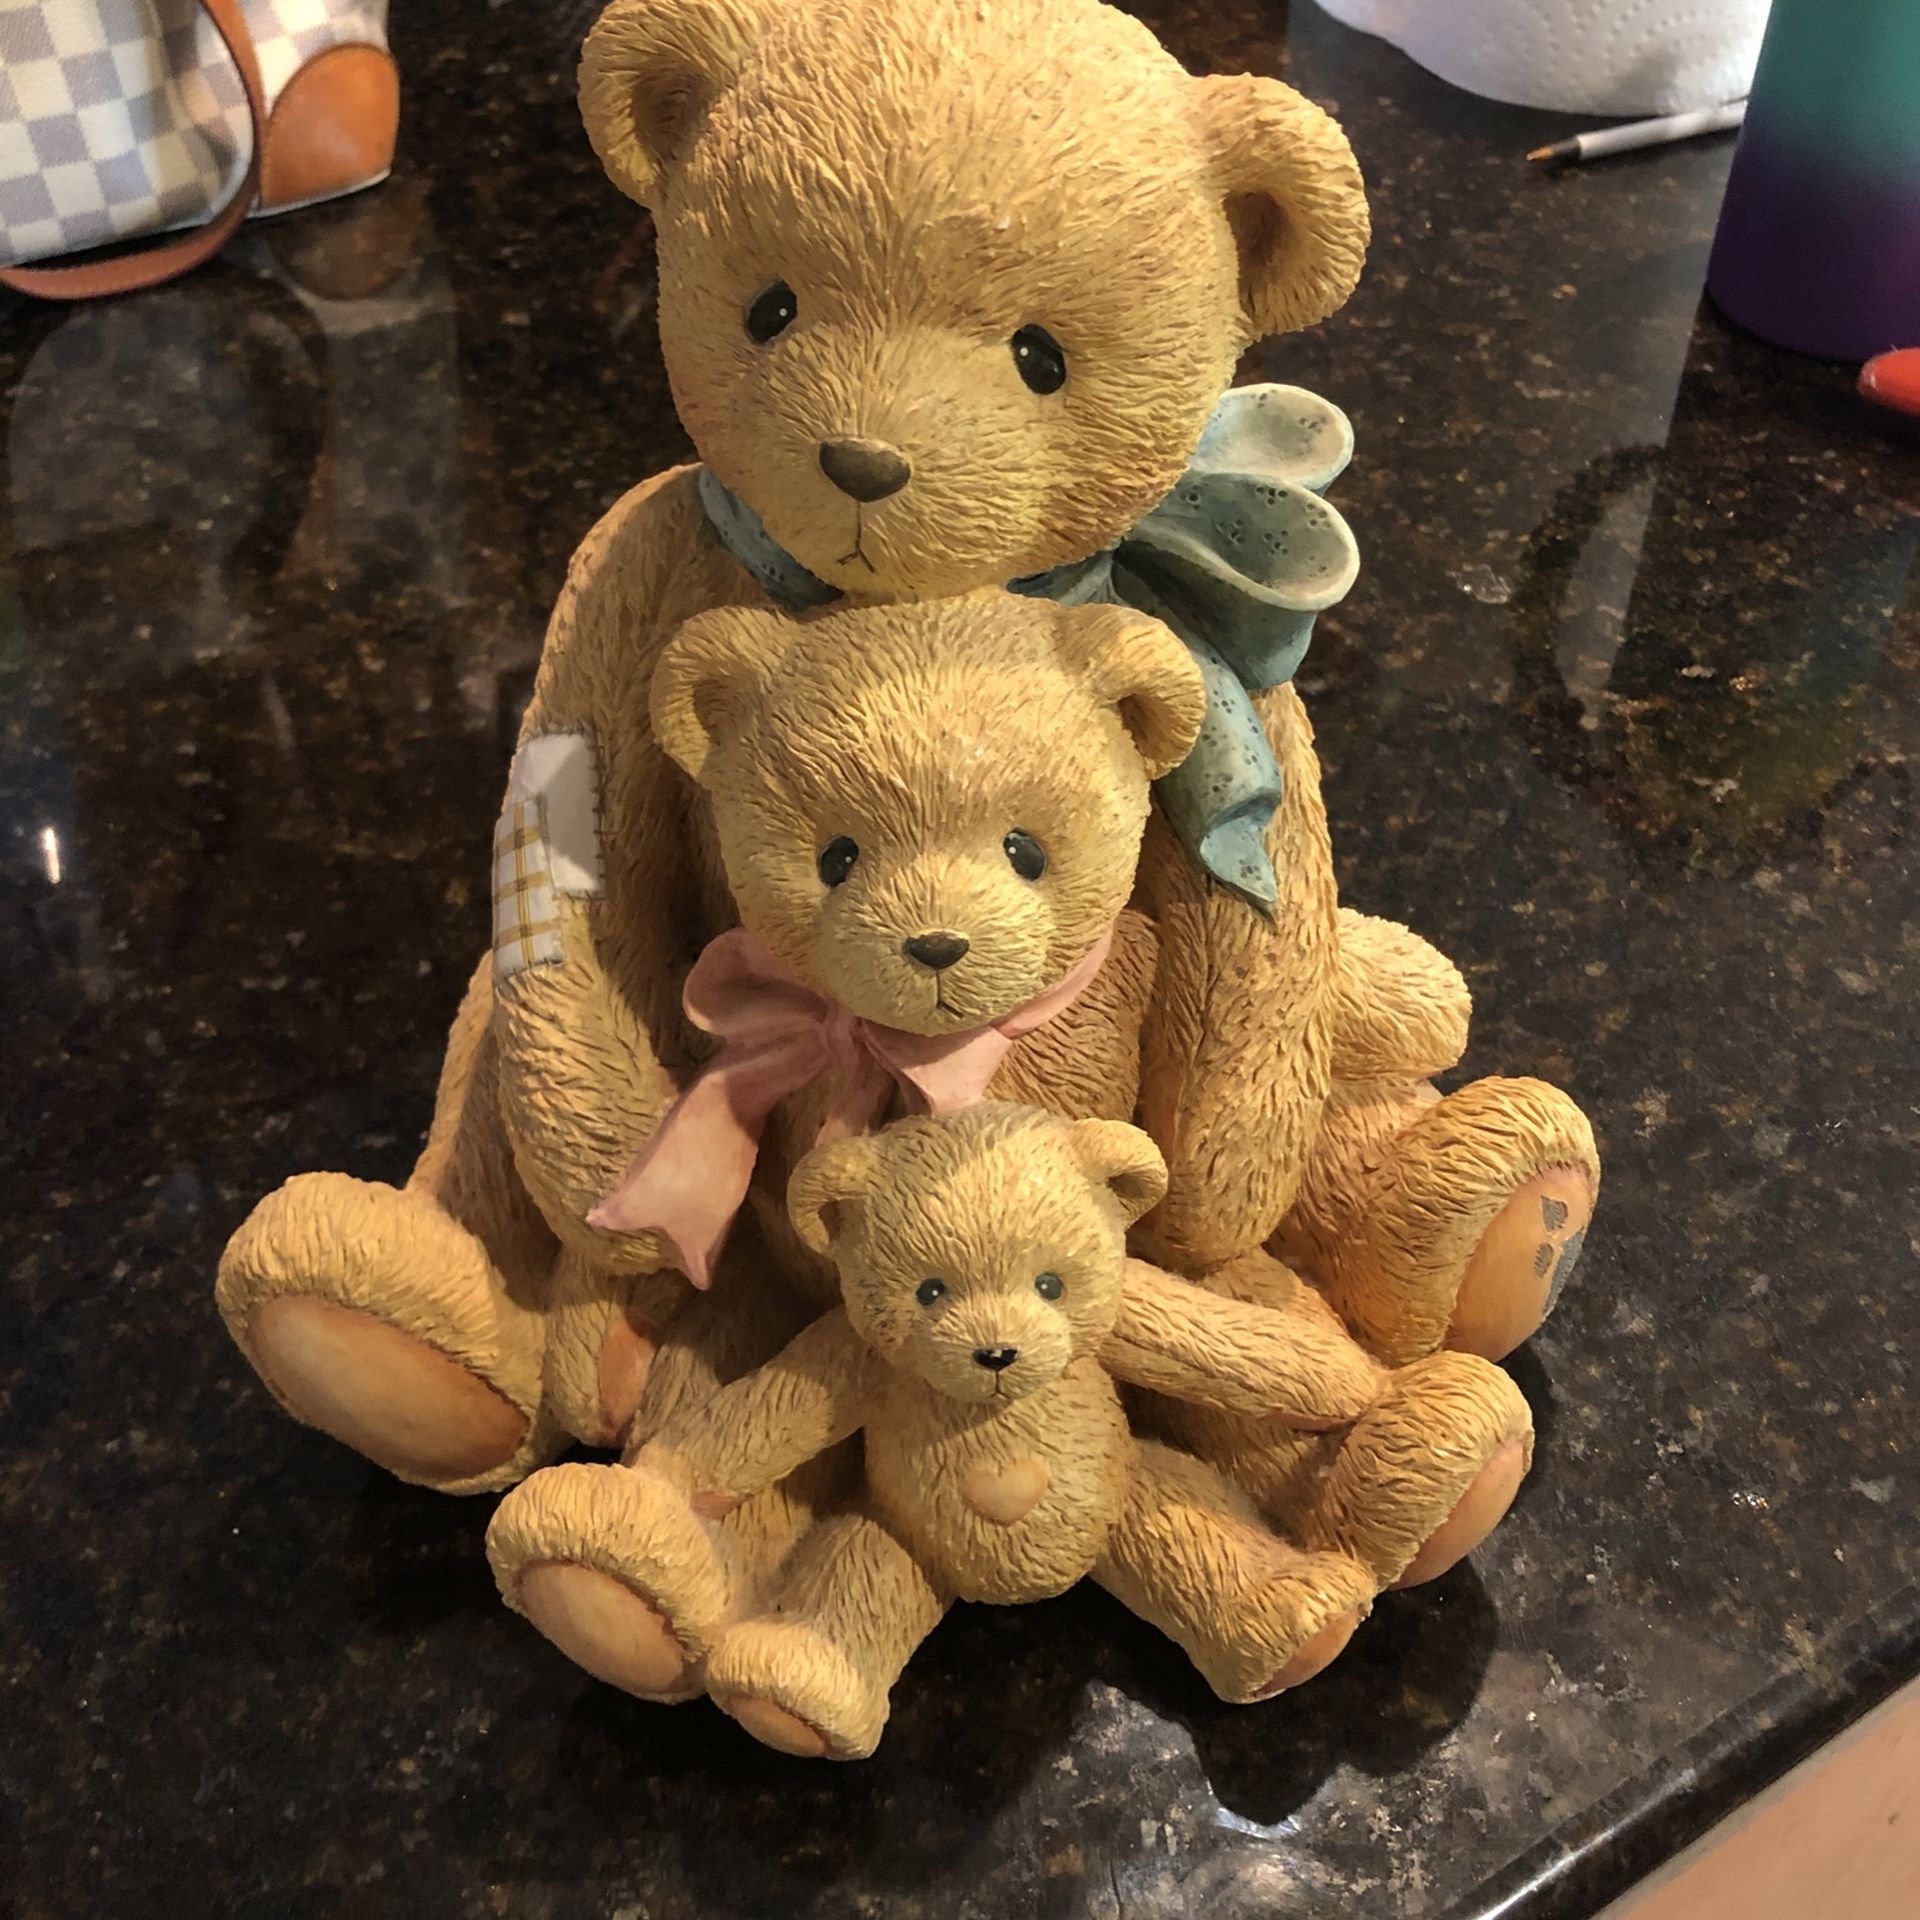 CHERISHED TEDDIES “FRIENDS COME IN ALL SIZES”